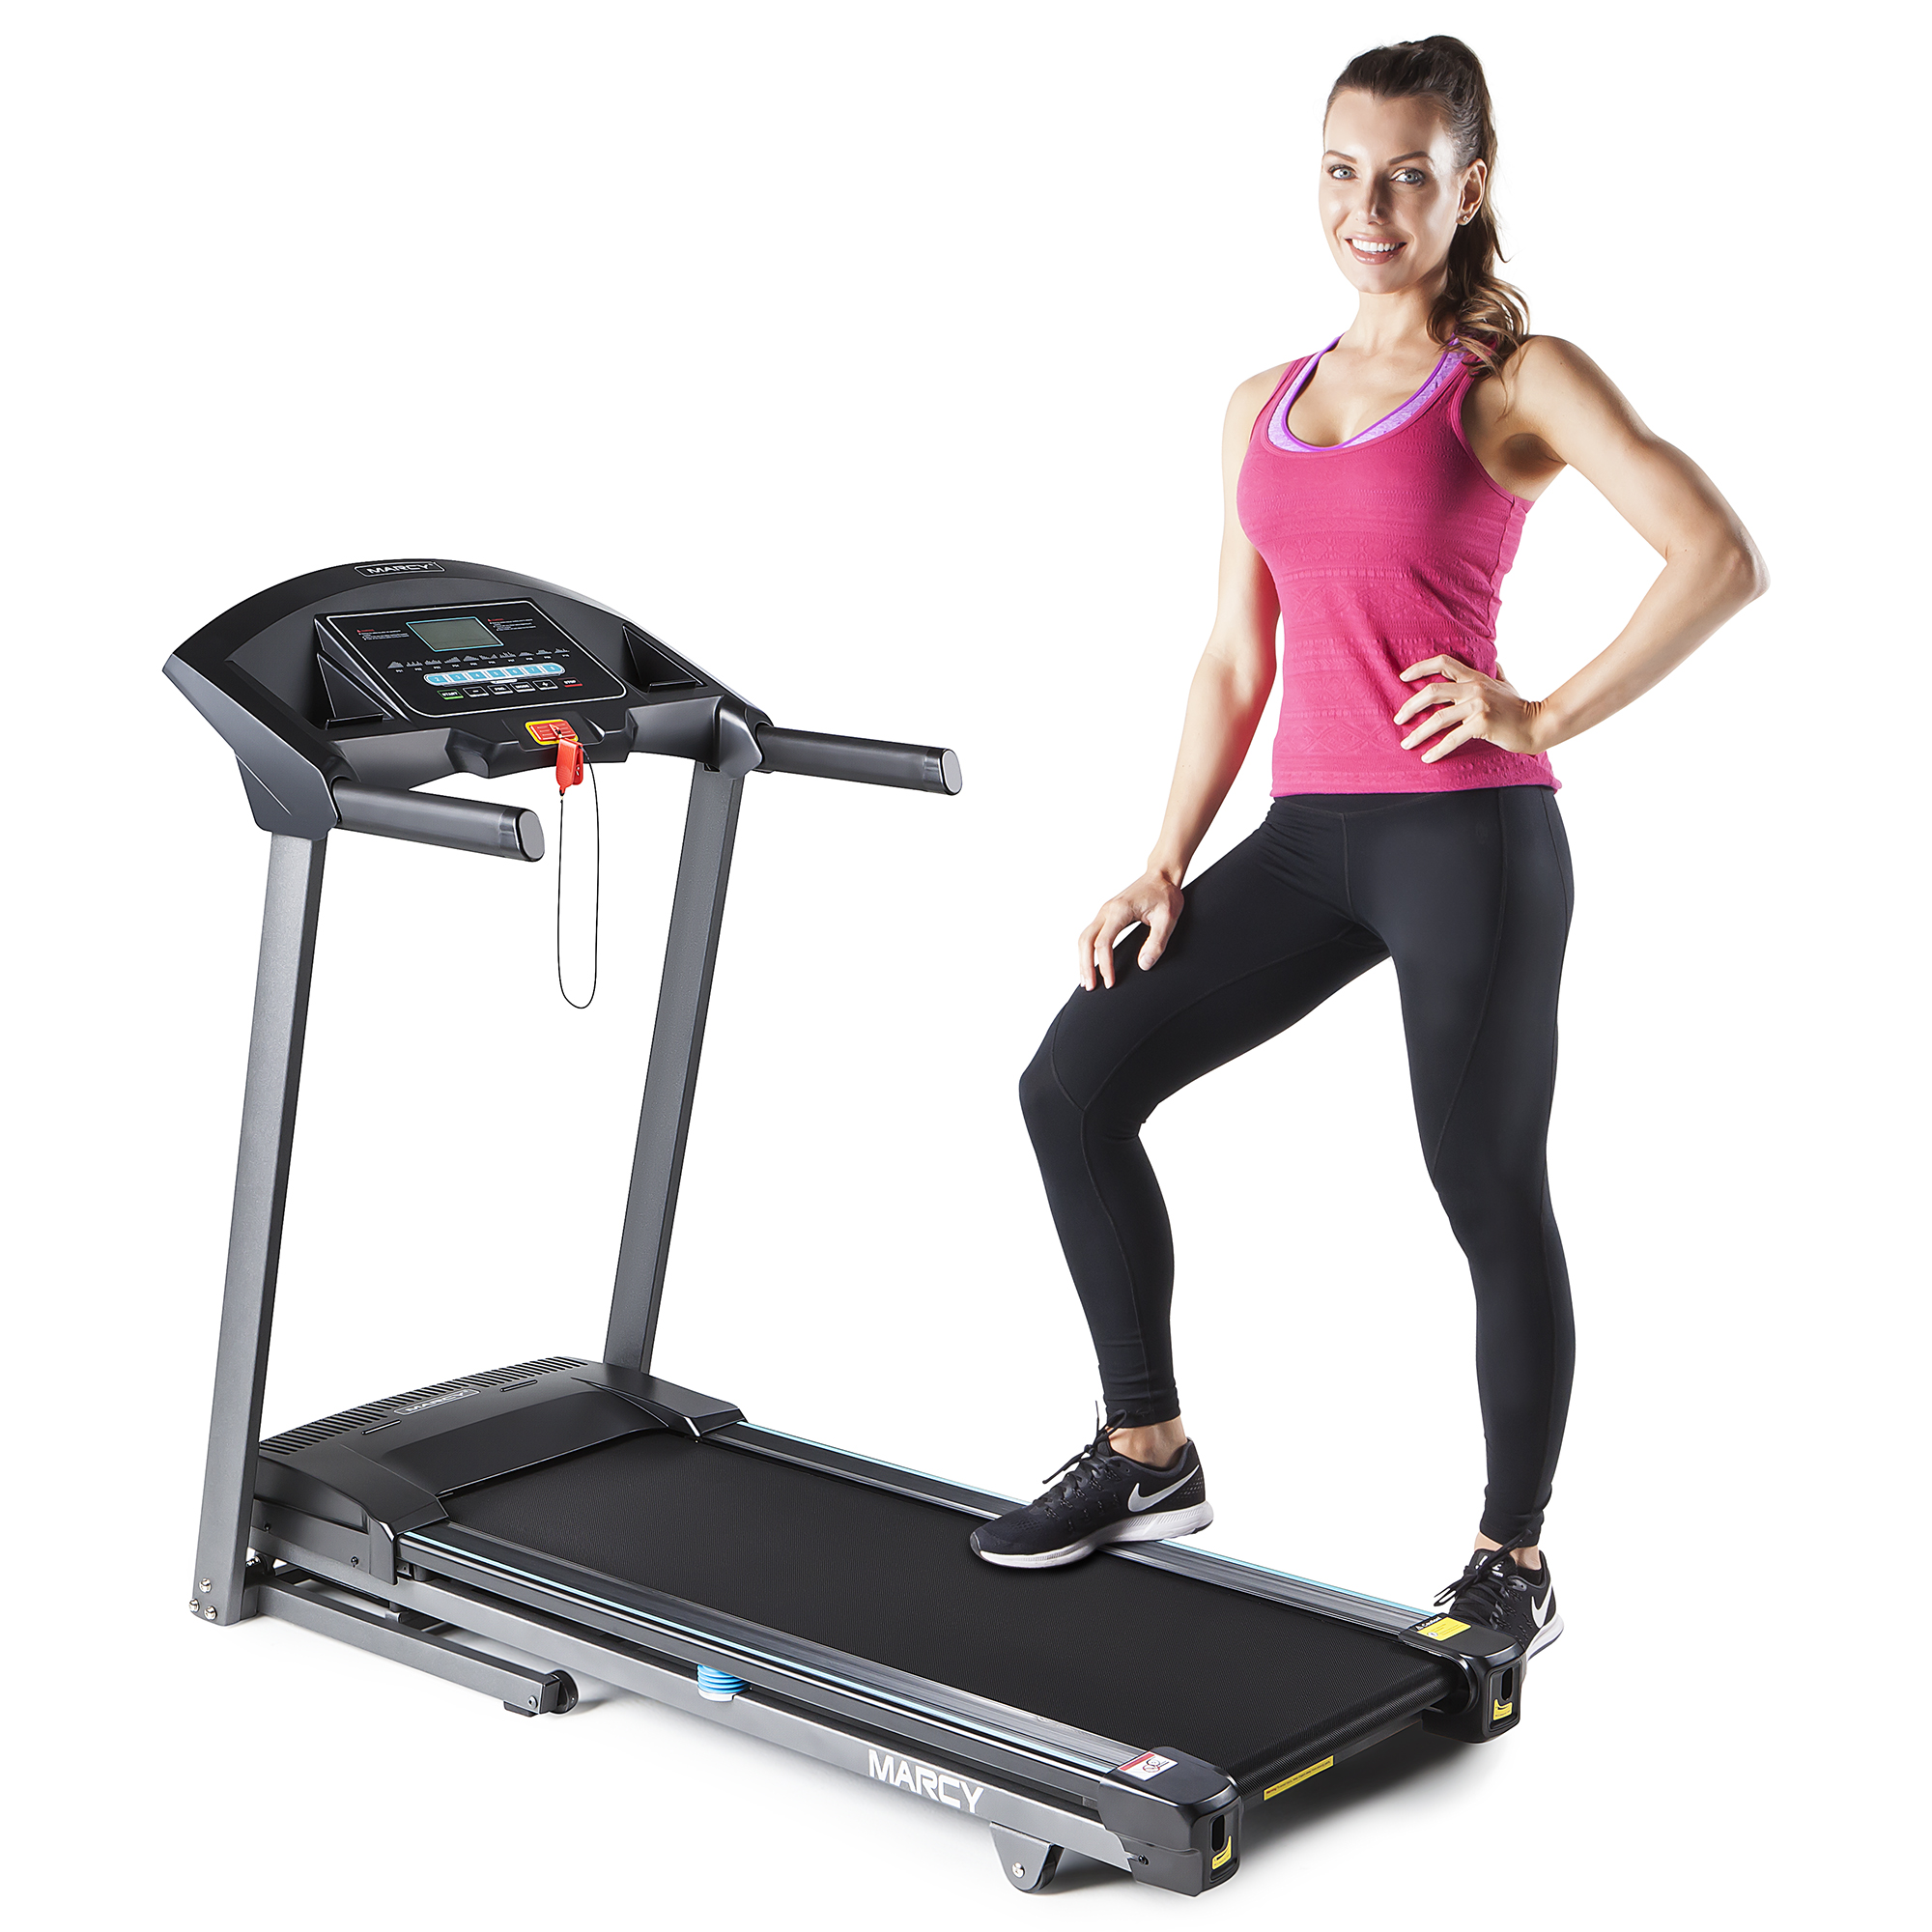 Marcy JX-650W Folding Motorized Treadmill with 10 Pre-set Training Routines